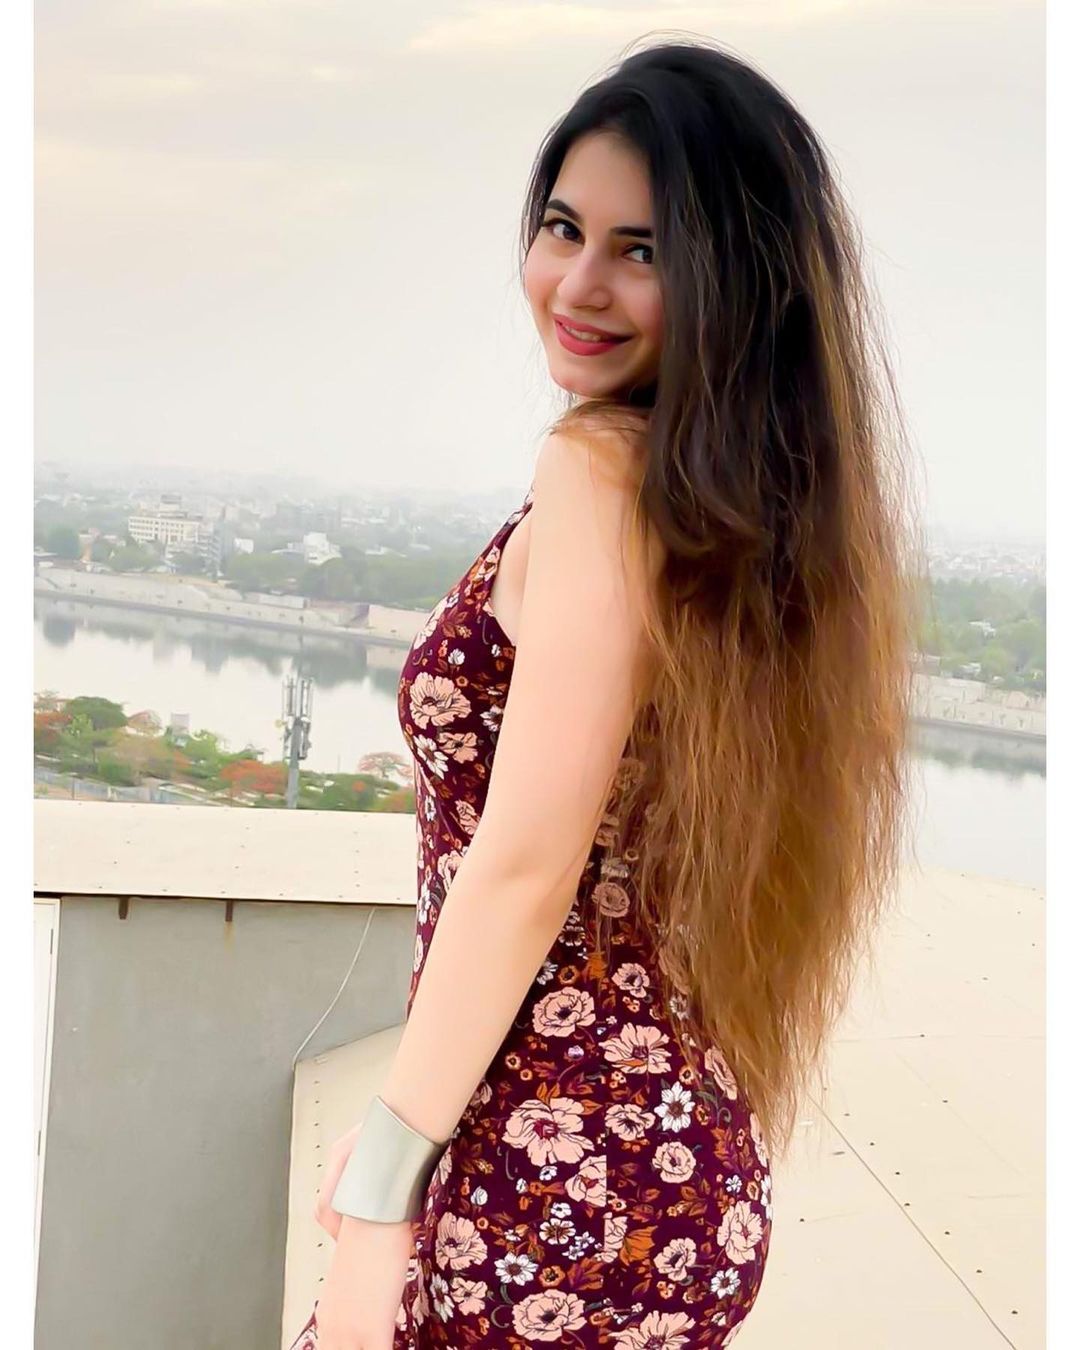 Monal Jagtani Instagram, Biography, Twitter, Success Story, Net Worth, Age, Family, Boyfriend, Career, Education, and Body Measurements